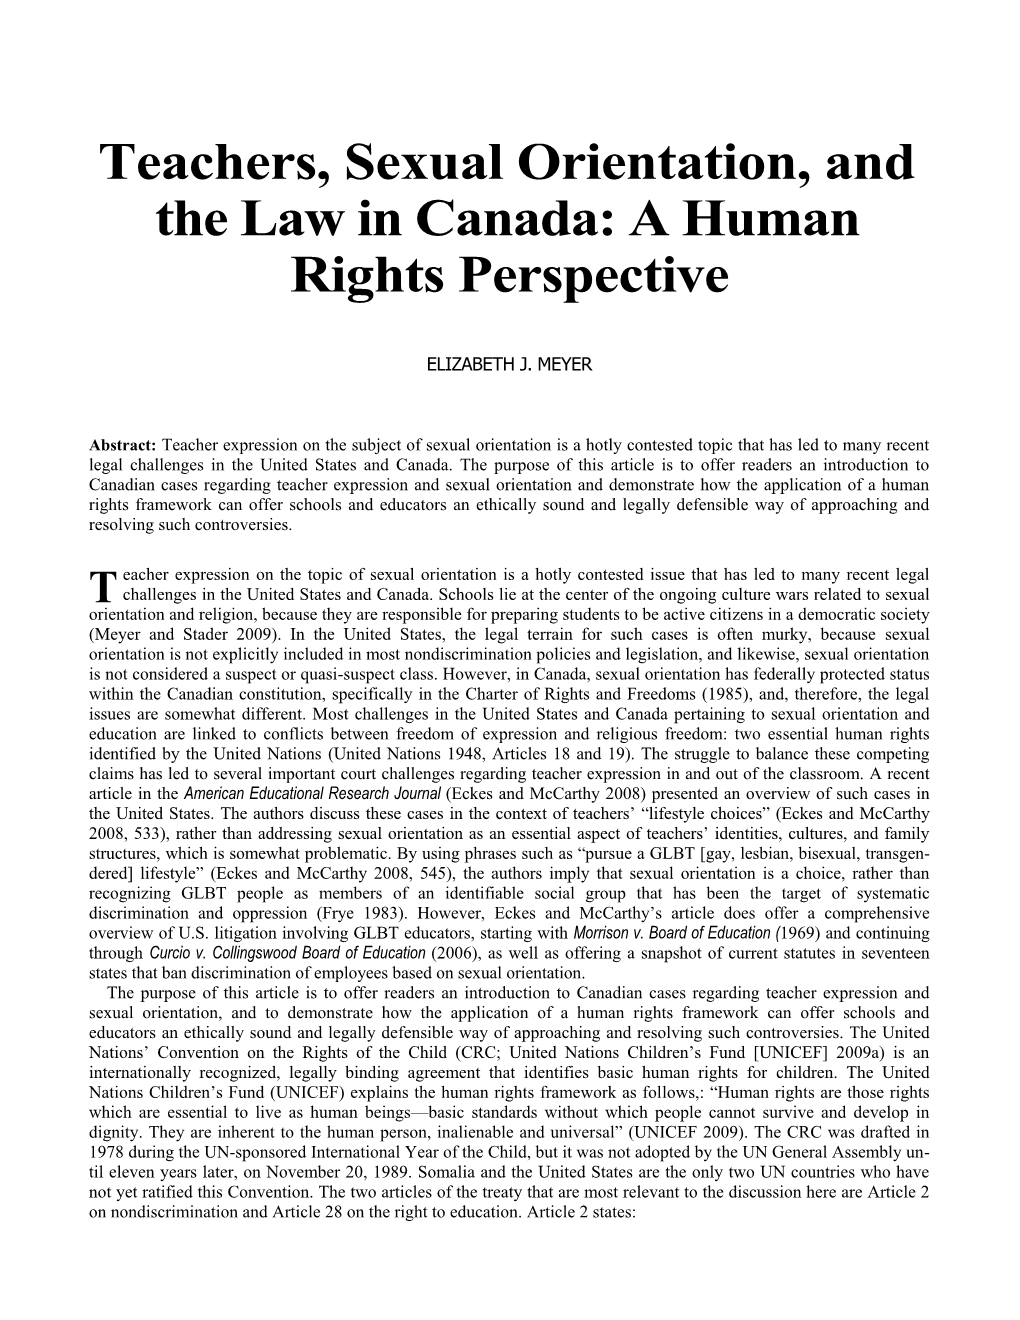 Teachers, Sexual Orientation, and the Law in Canada: a Human Rights Perspective